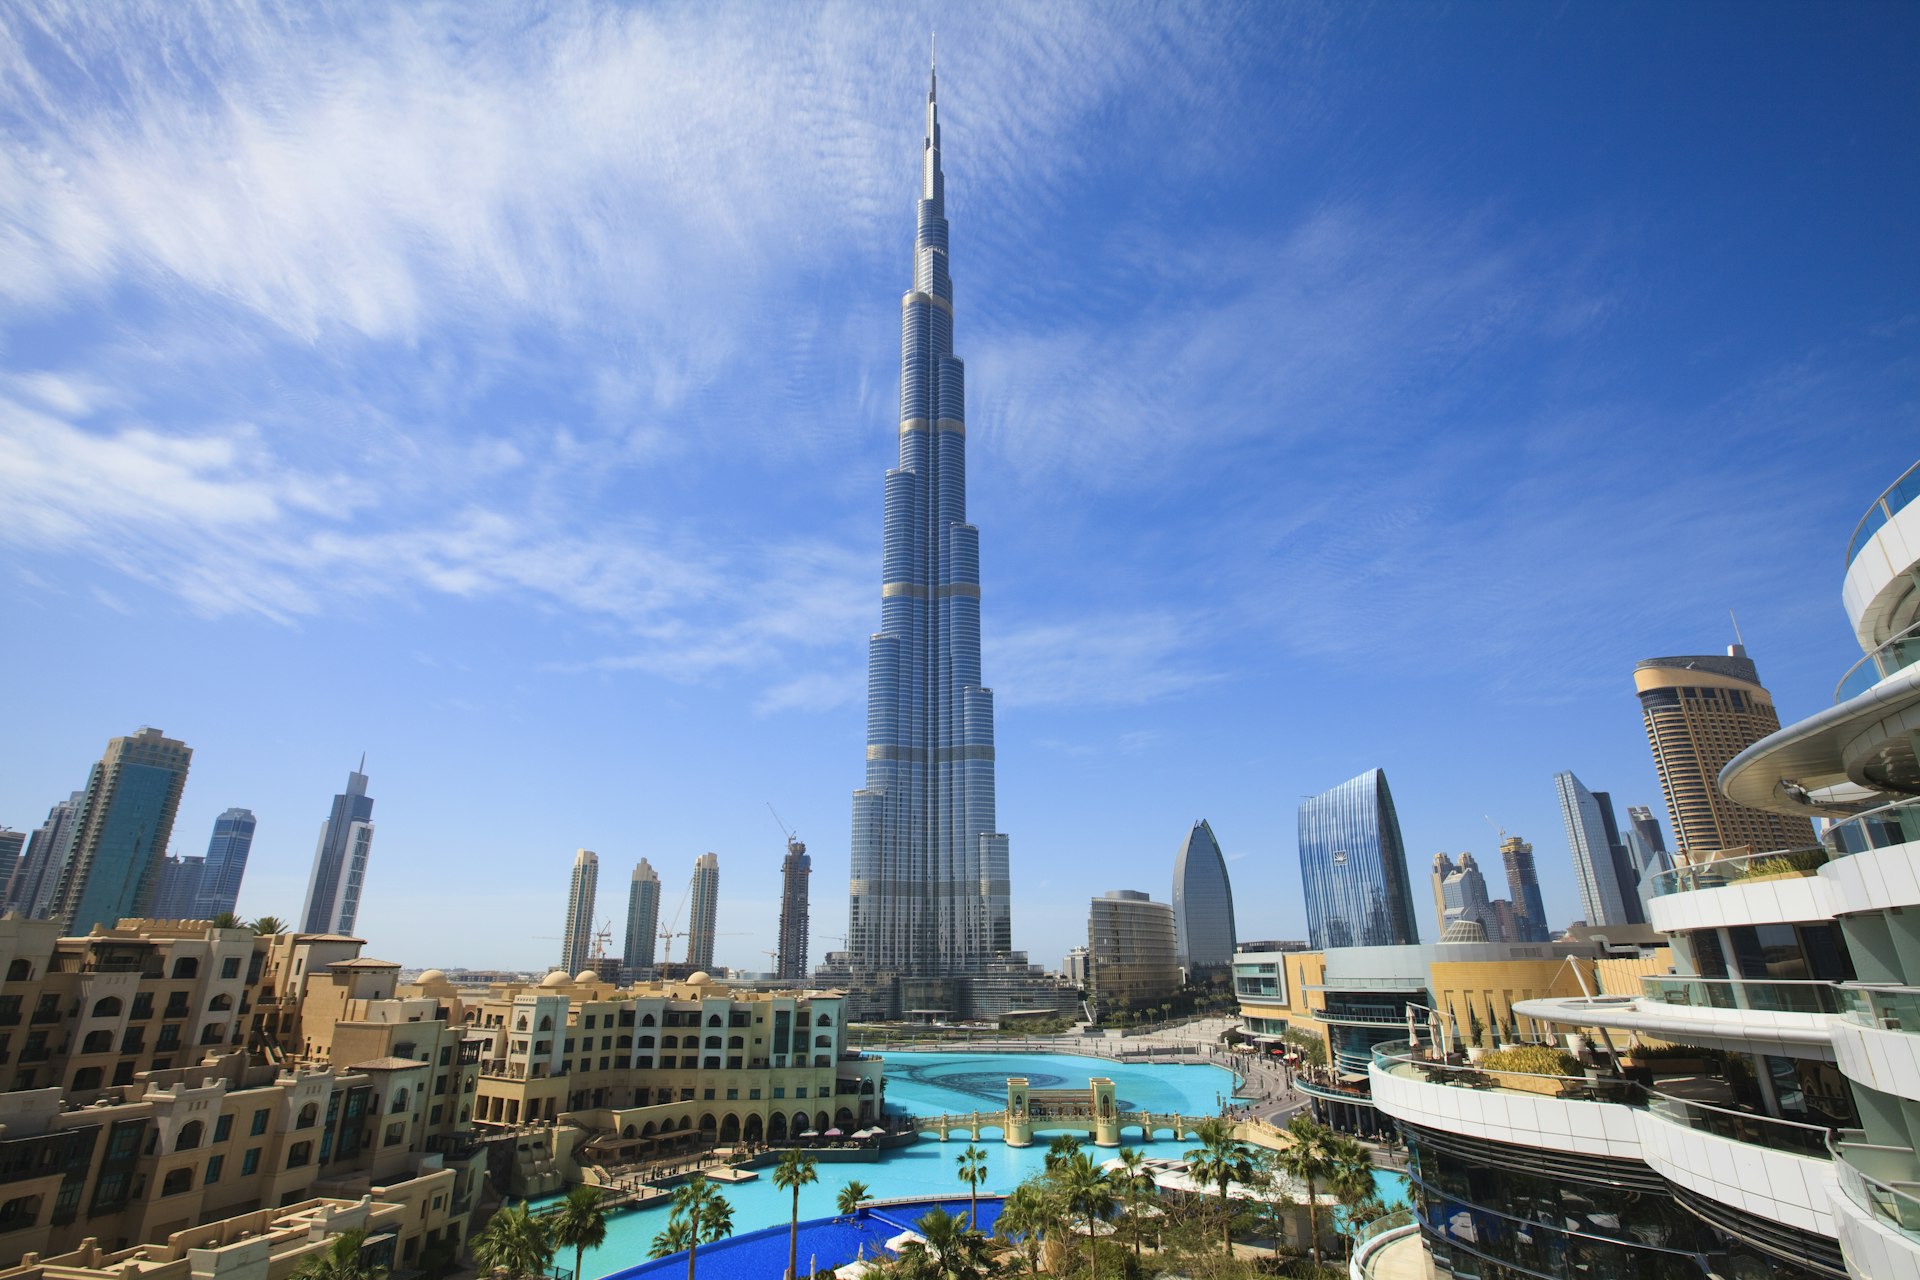 Dubai's Burj Khalifa, the tallest man-made structure in the world at 828 meters